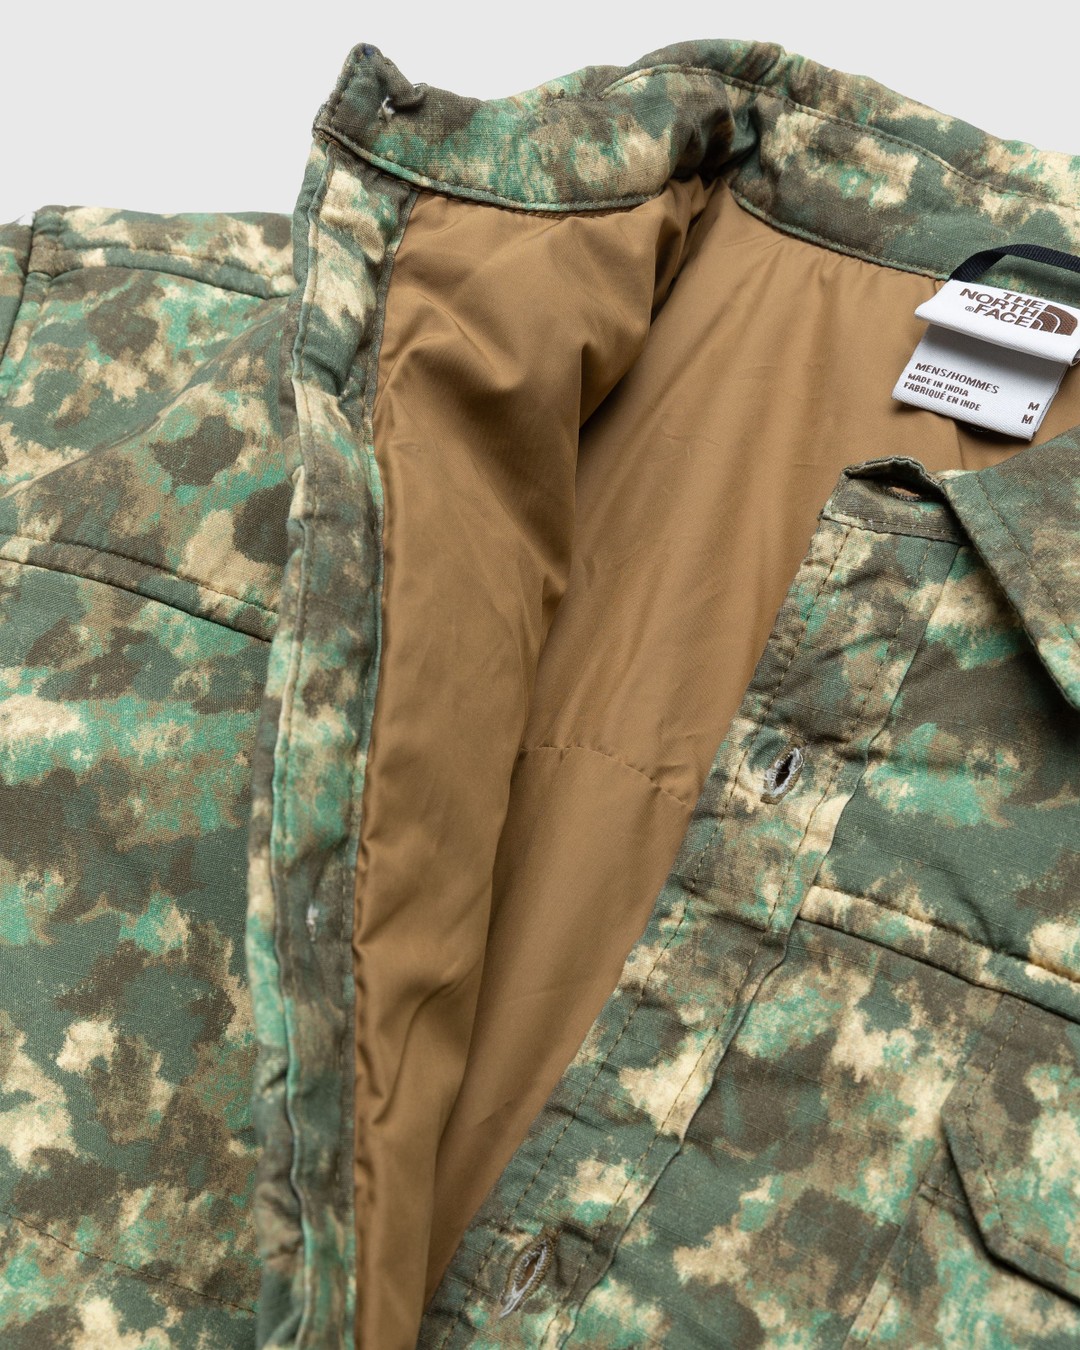 The North Face – M66 Stuffed Shirt Jacket Military Olive/Stippled Camo Print - Outerwear - Green - Image 4